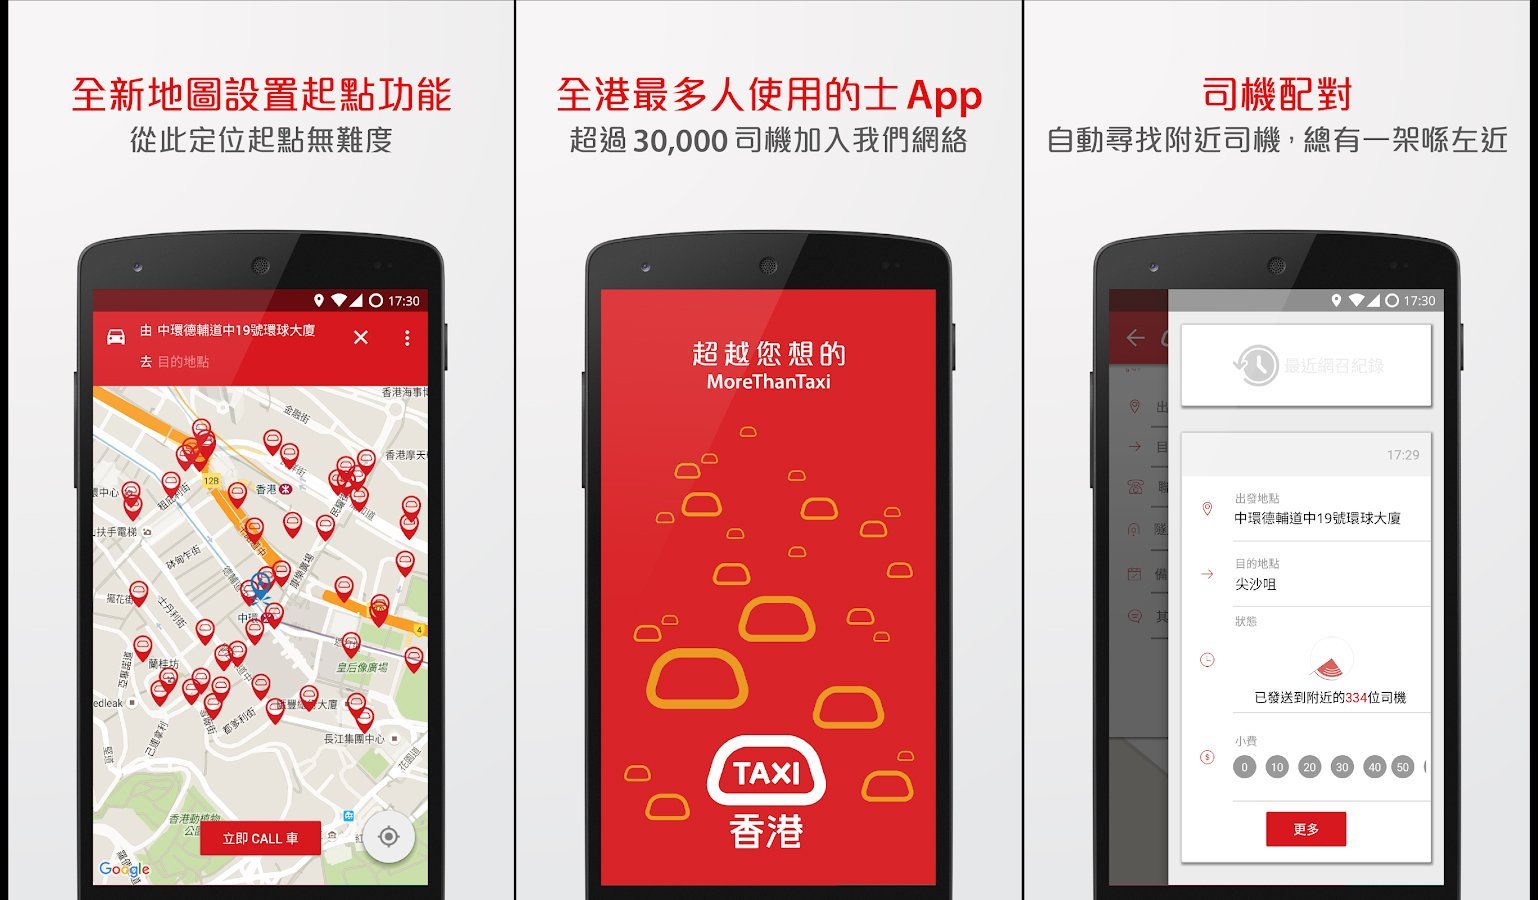 hk taxi app test by consumer council 02